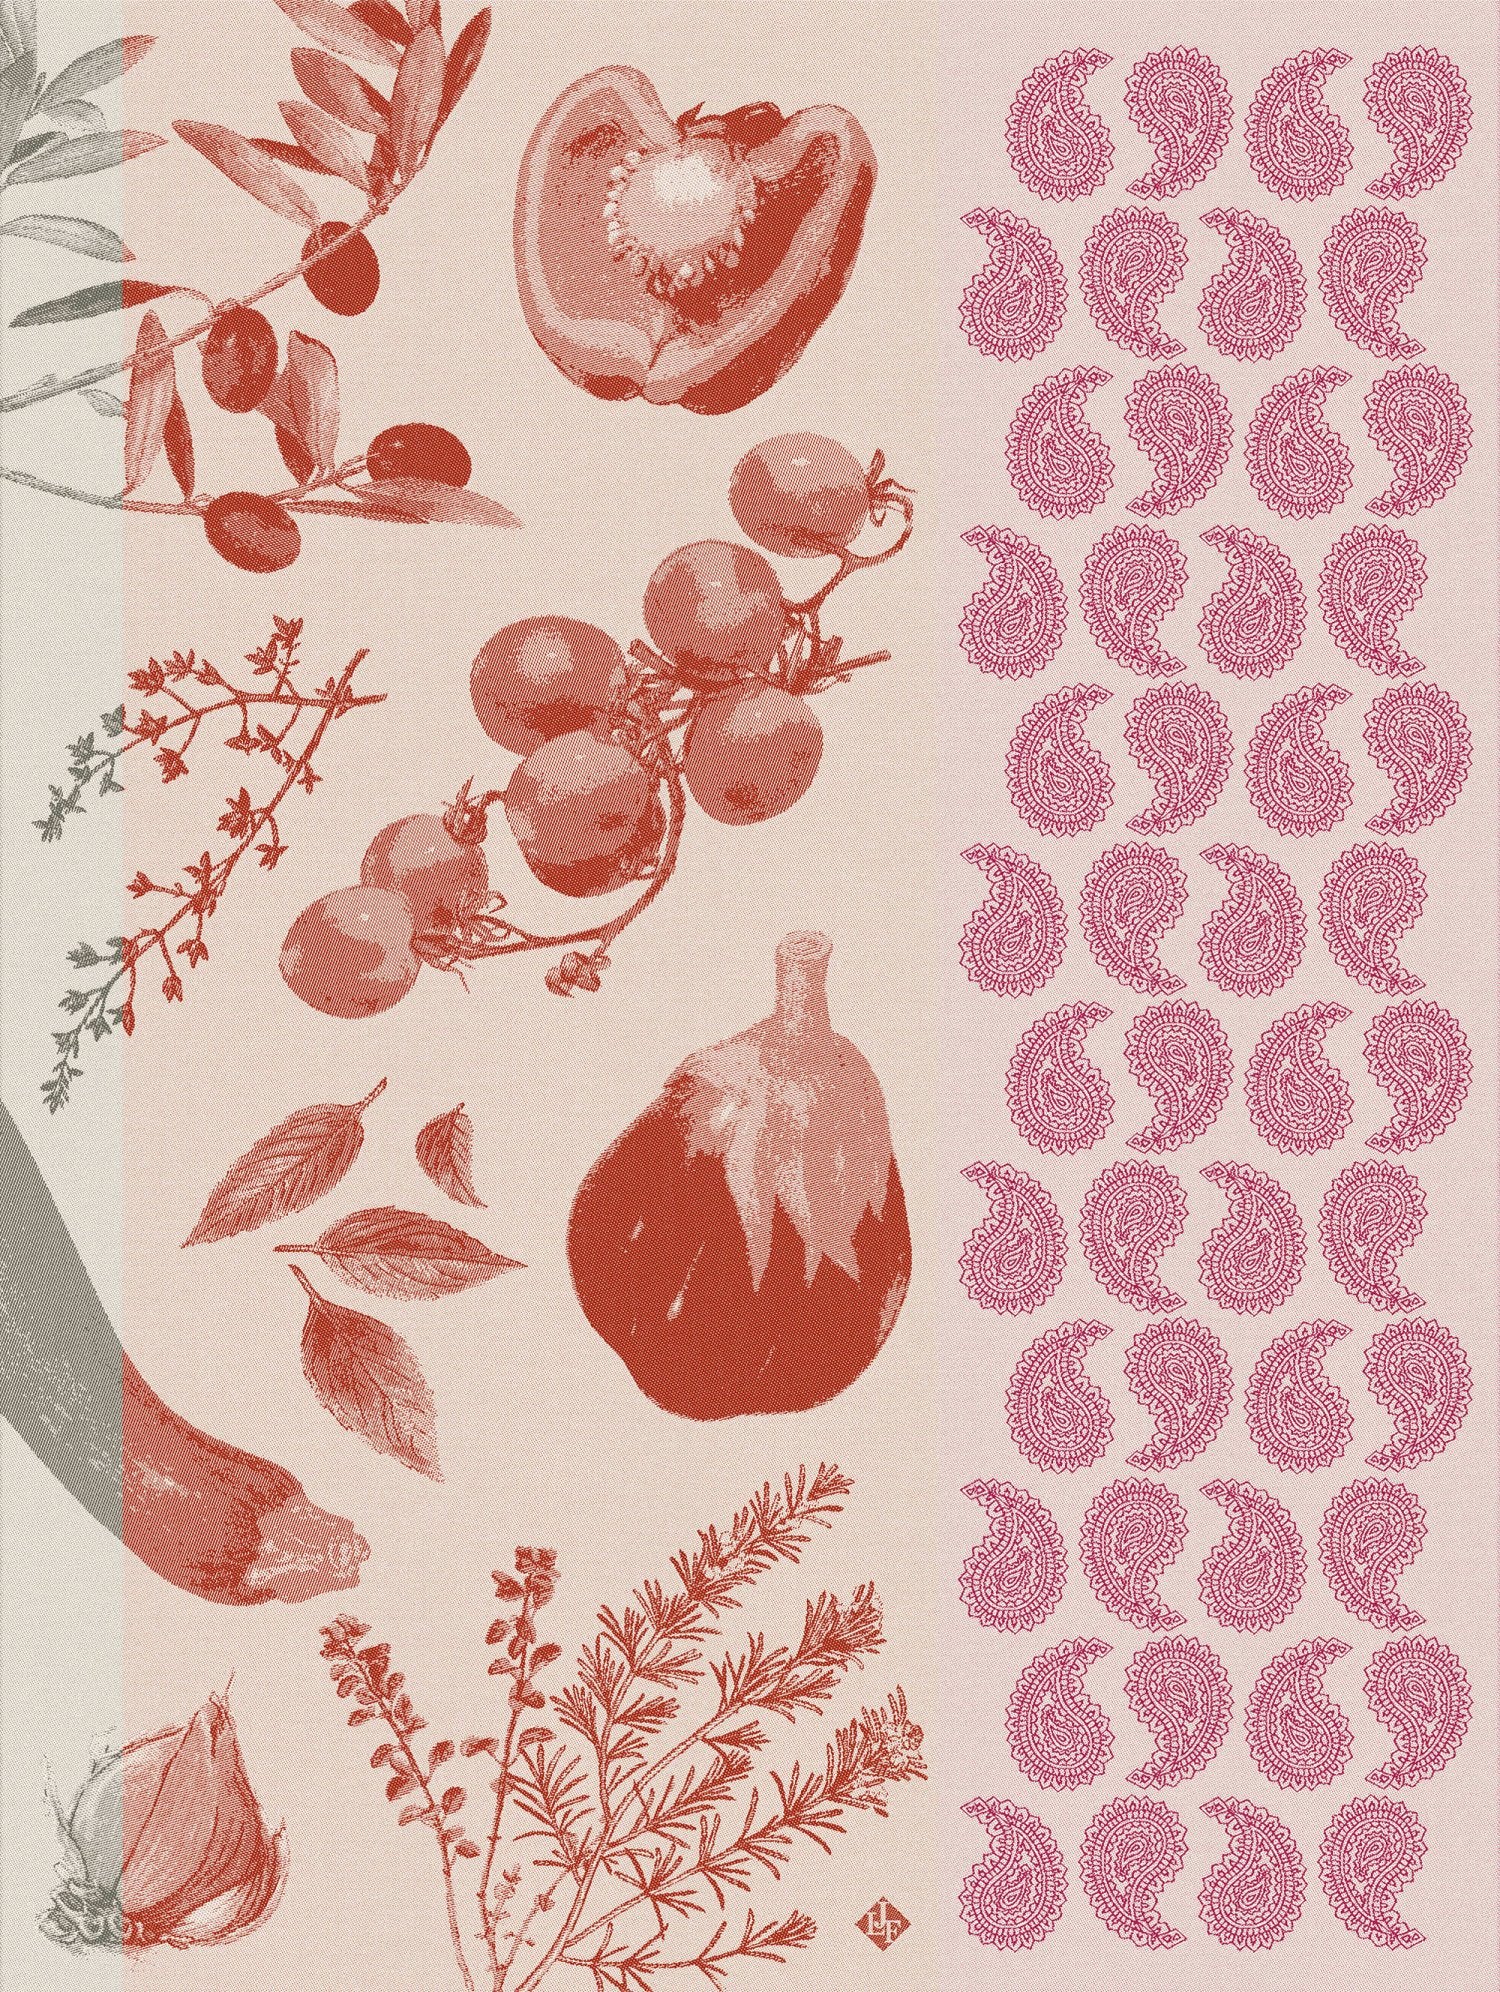 Jacquard Francais "Soleil a Table" (Tomate), Woven cotton tea towel. Made in France.